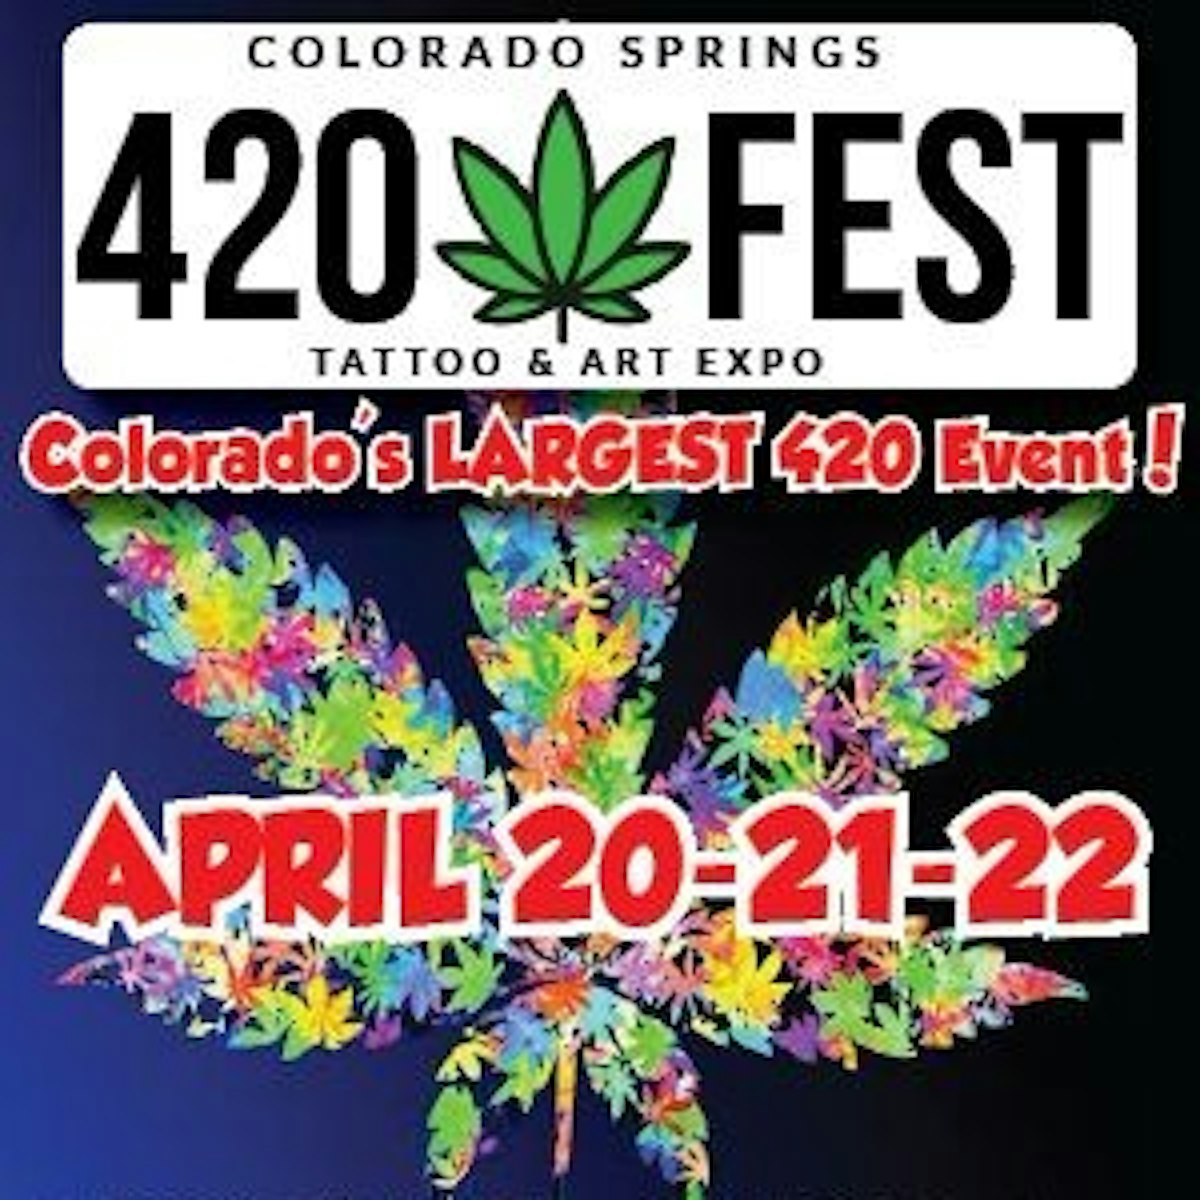 Colorado Springs 420 Fest, Tattoo, & Art Expo: Colorado's Largest 420 Fest  | Leafly